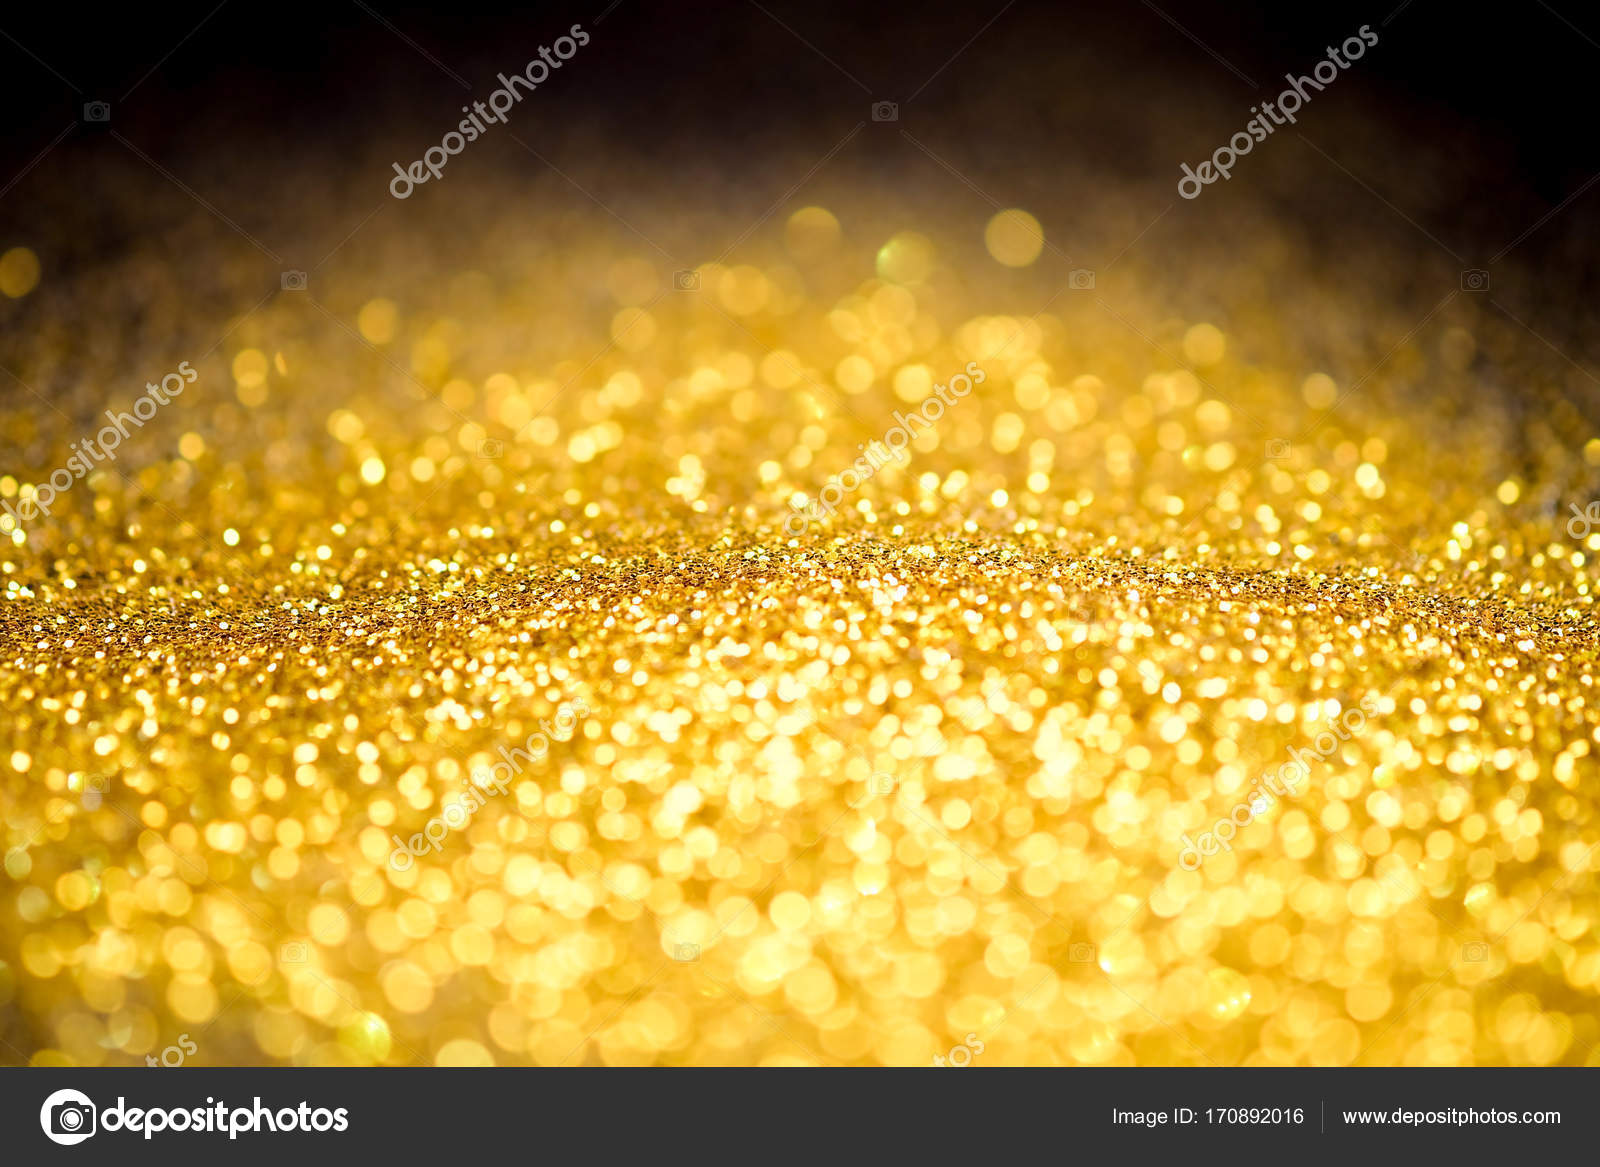 Gold Dust Powder Sparkling Glitter Abstract Background Texture